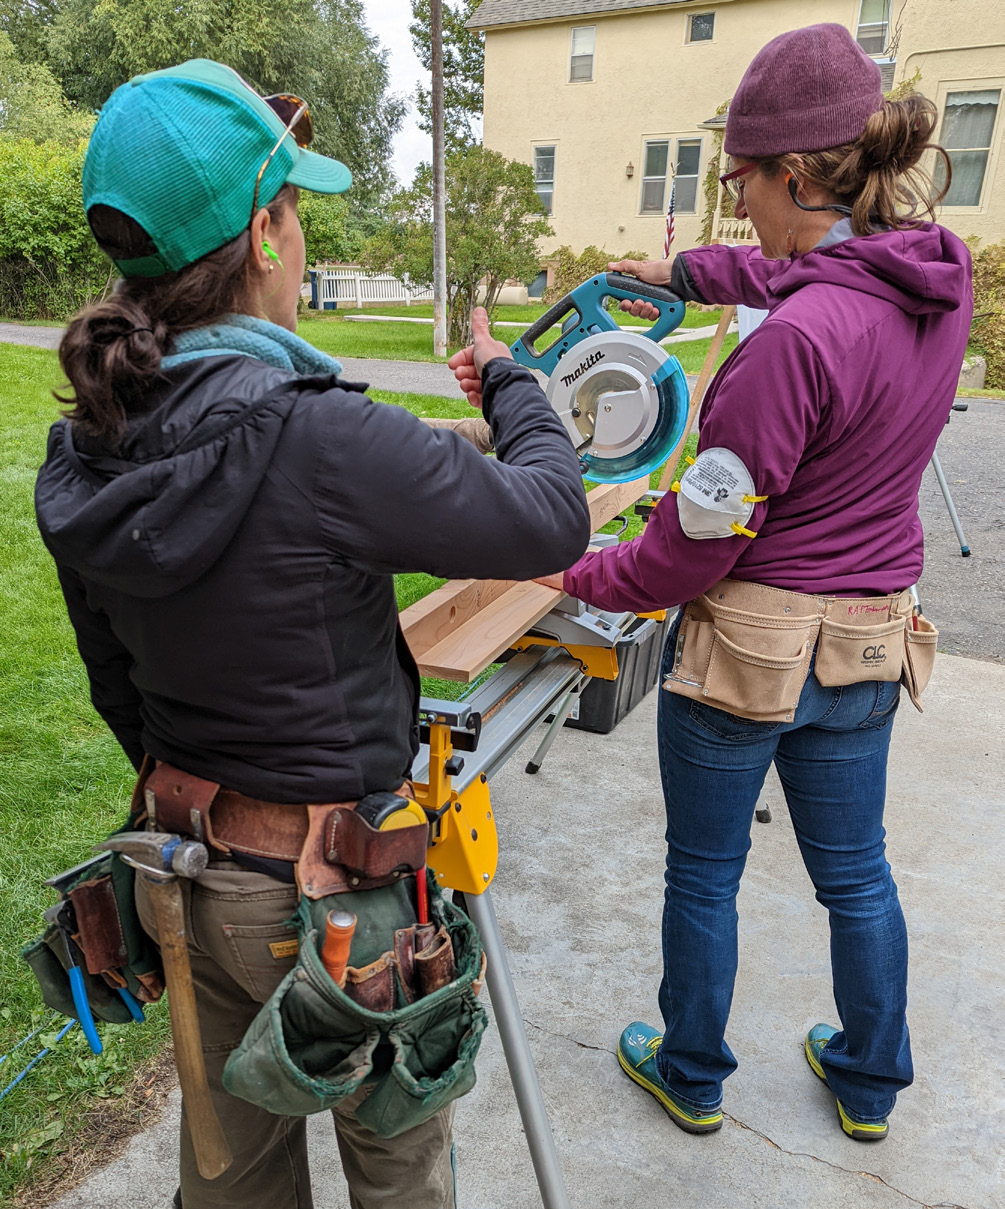 Two women using a circular carpentry saw, one is teaching and the other is learning.